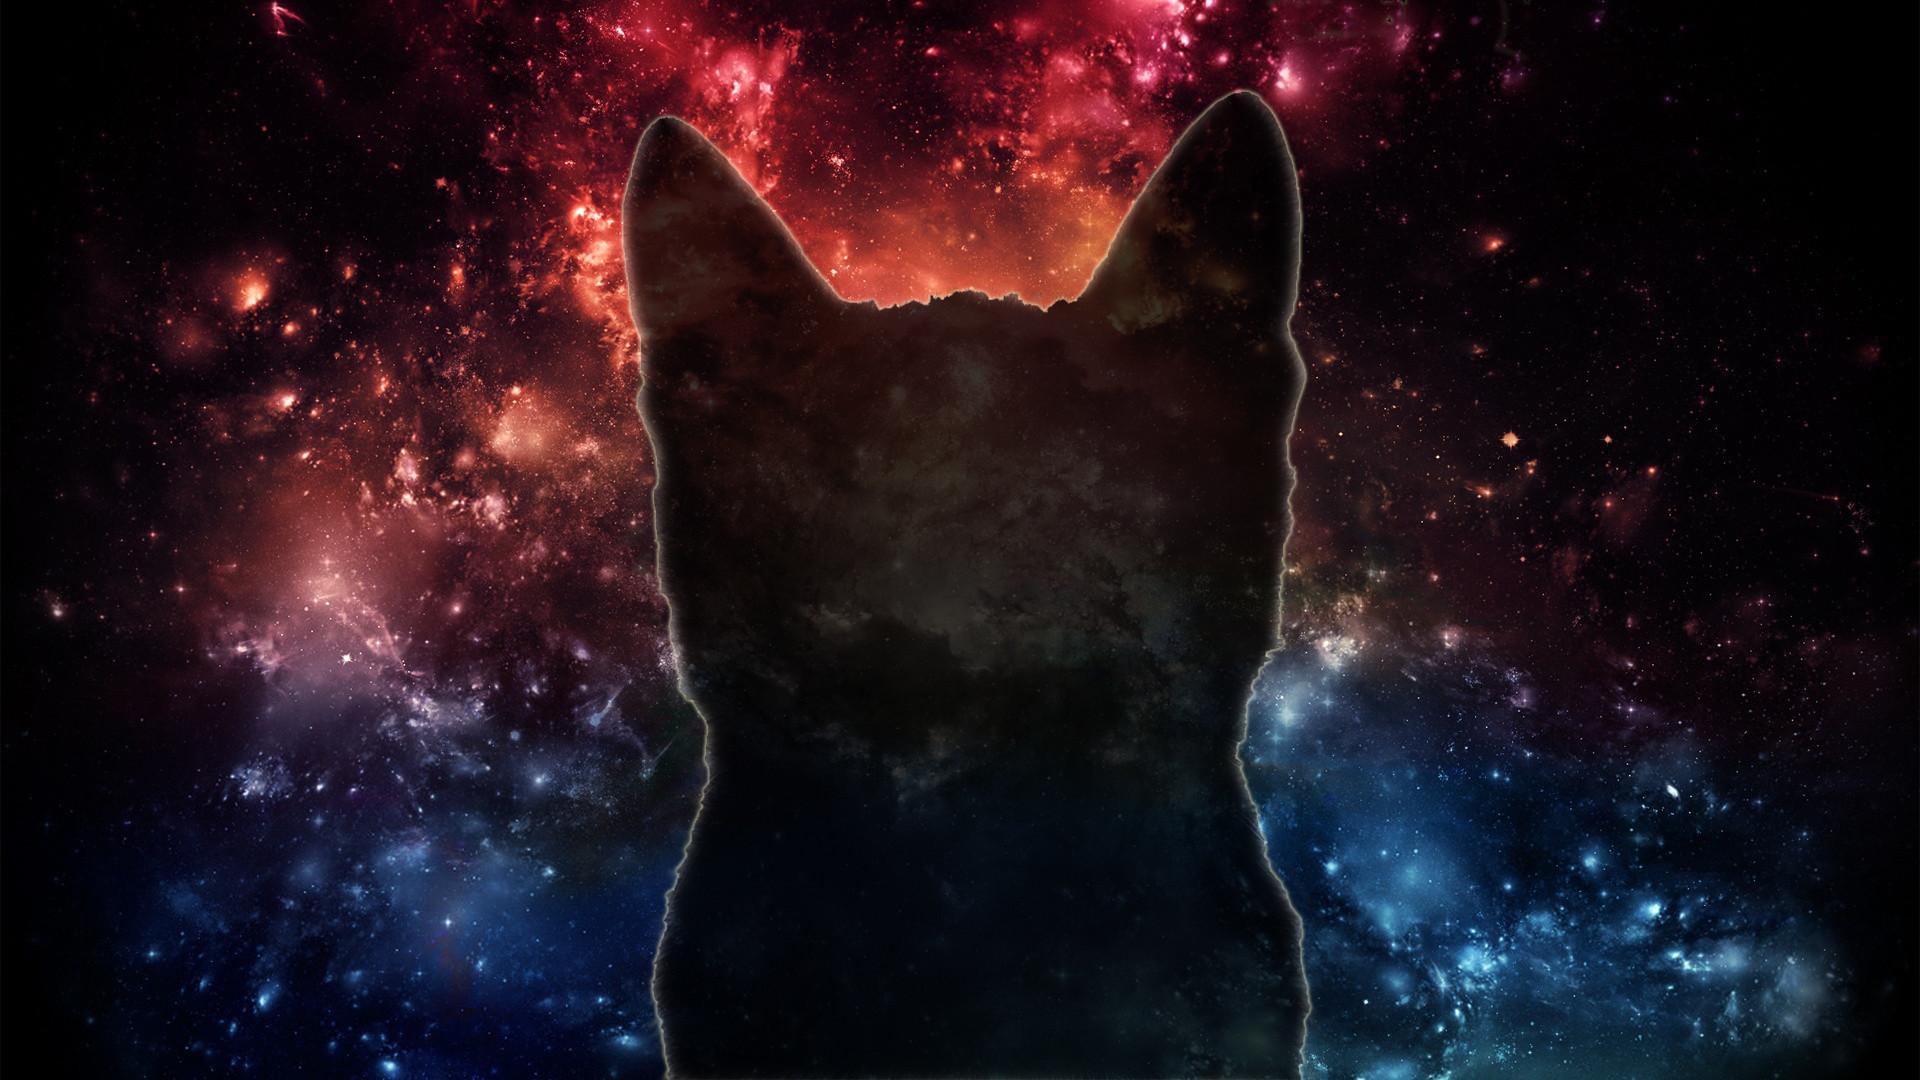 78+ Space Cat Wallpapers